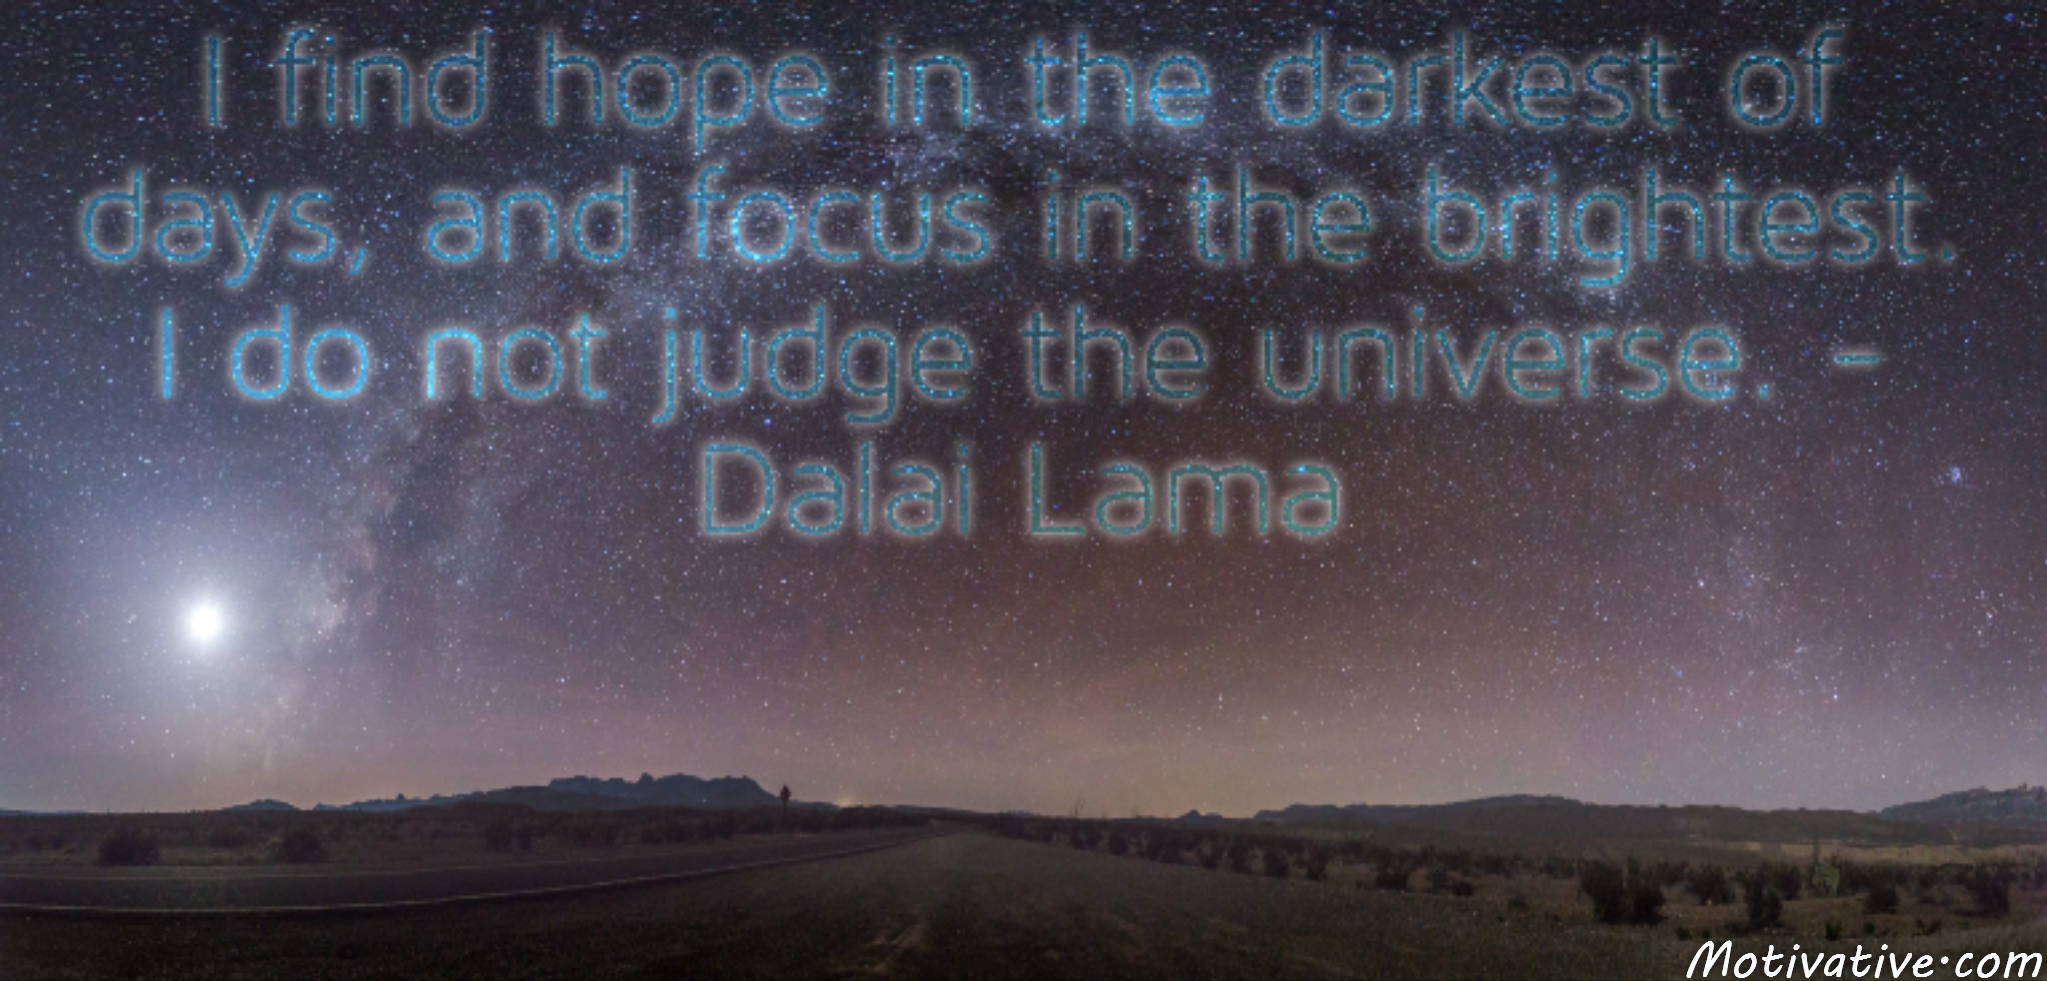 I find hope in the darkest of days, and focus in the brightest. I do not judge the universe. – Dalai Lama